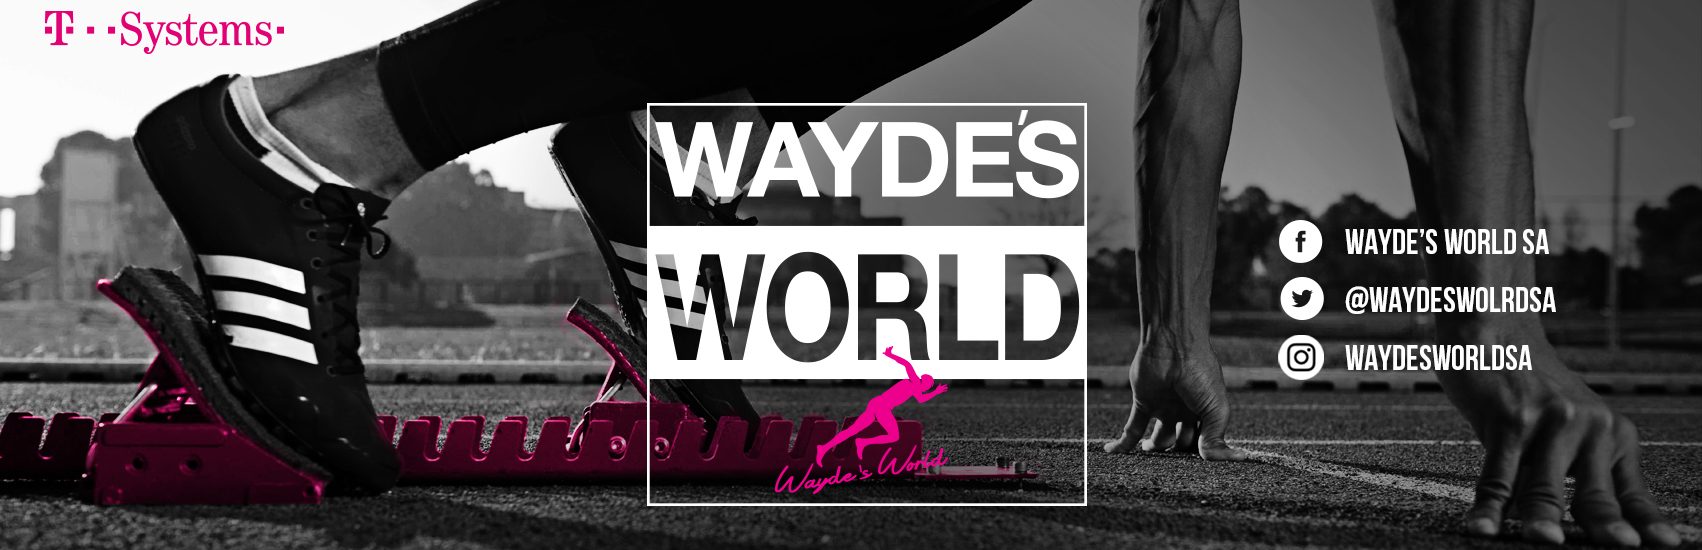 waydes-world_fb_coverpage_02d